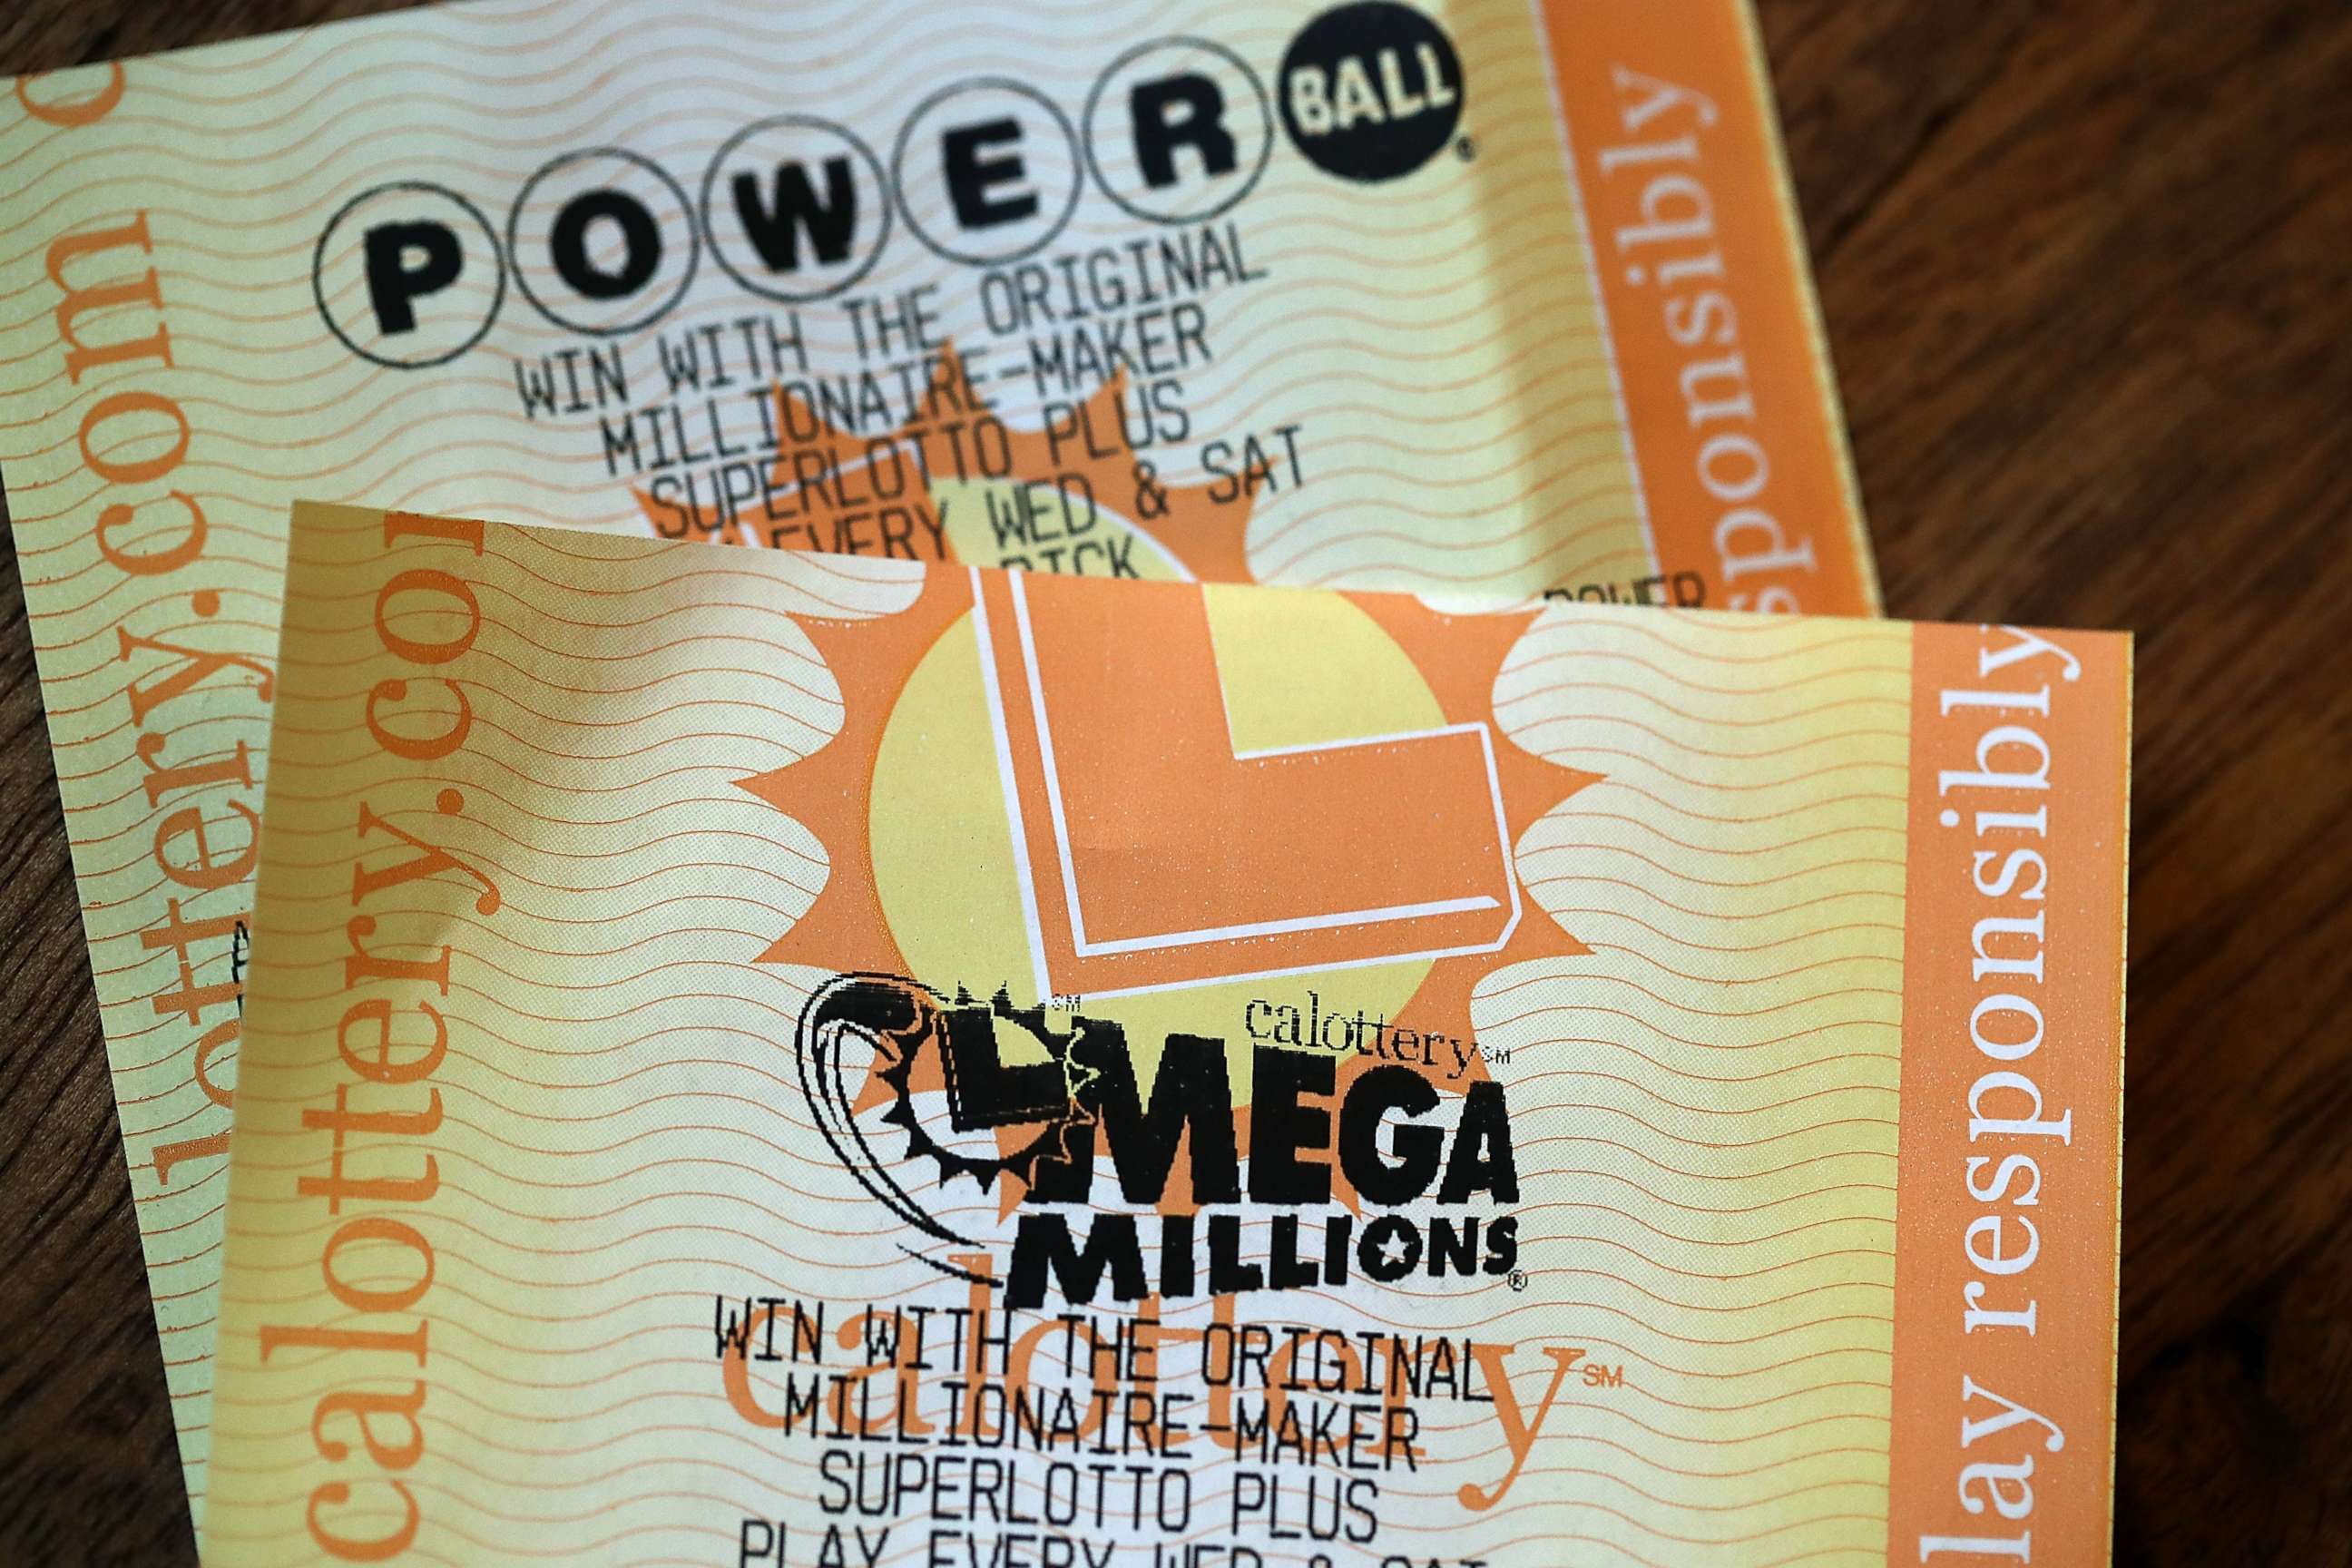 PHOTO: Powerball and Mega Millions lottery tickets, Jan 3, 2018 in San Anselmo, Calif. The Powerball jackpot and Mega Millions jackpots are both over $400 million.